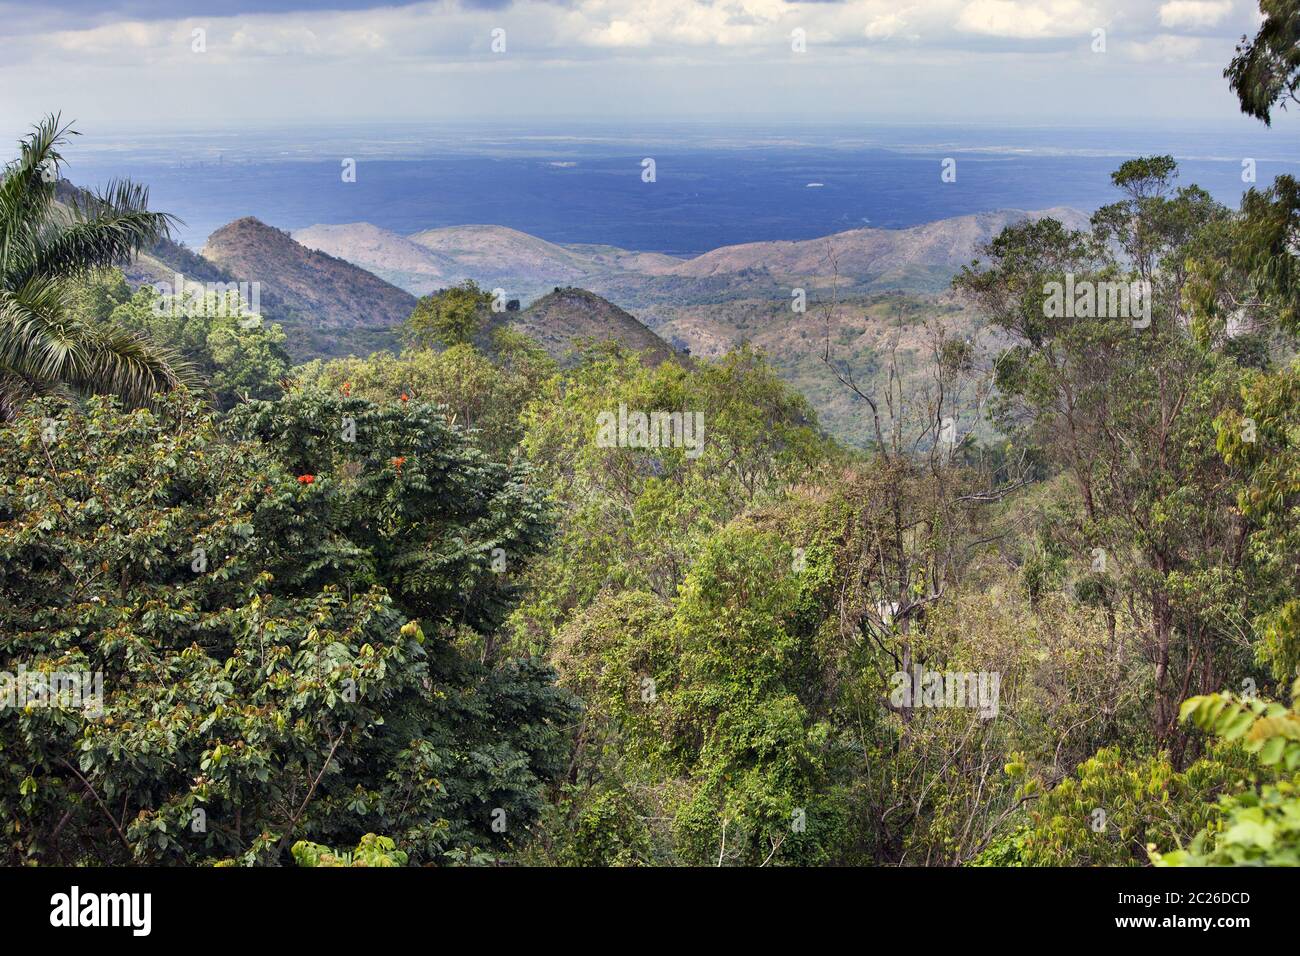 Cuba. Hills covered with tropical vegetation Stock Photo